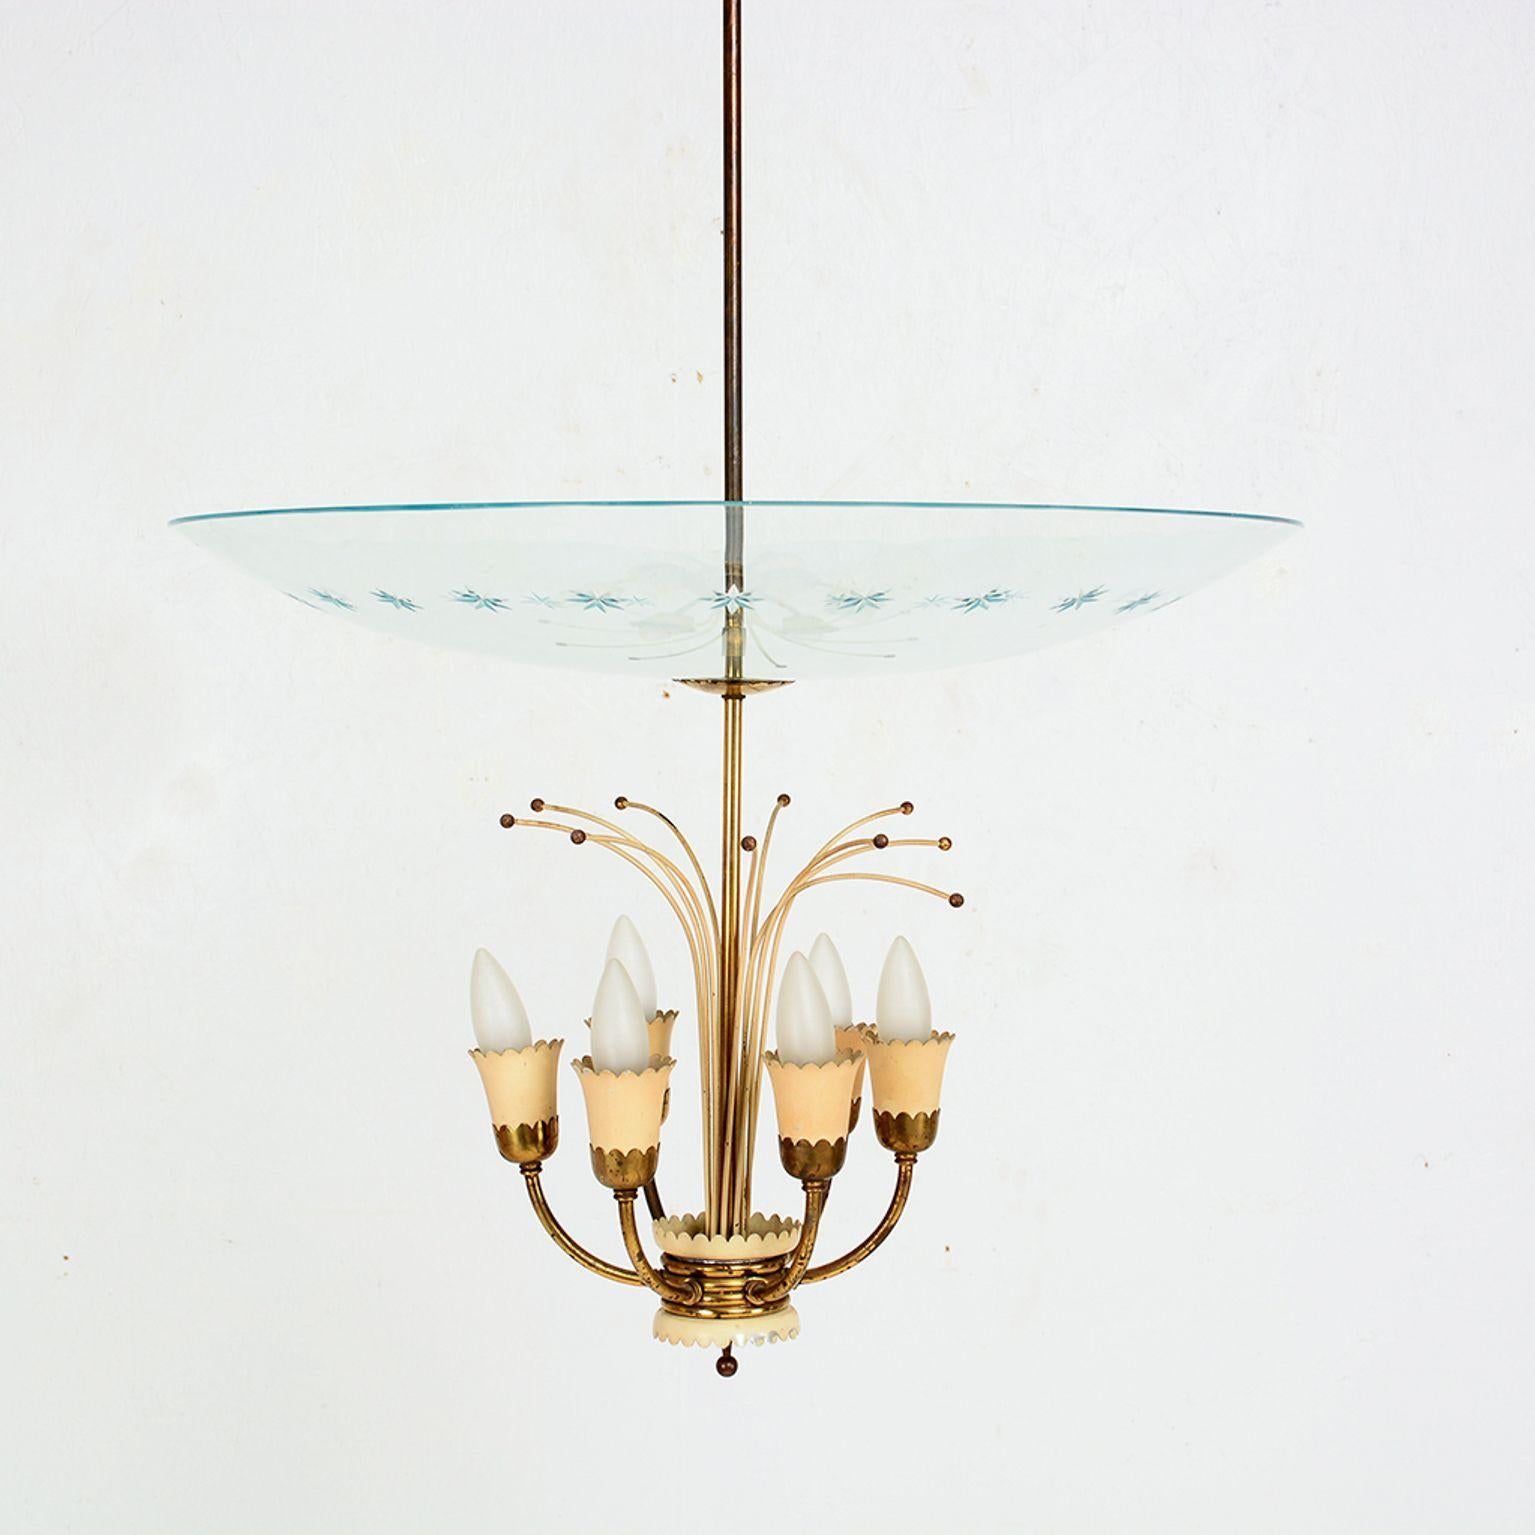 Delicate and graceful 6 arm Italian Chandelier from the 1950s Italy
Style attributed to Fontana Arte Max Ingrand 1955
Unmarked.
Airy Sculptural form.
Made with cut glass, patinated brass and painted aluminum.
H 48 in. x Diameter 23.
Original